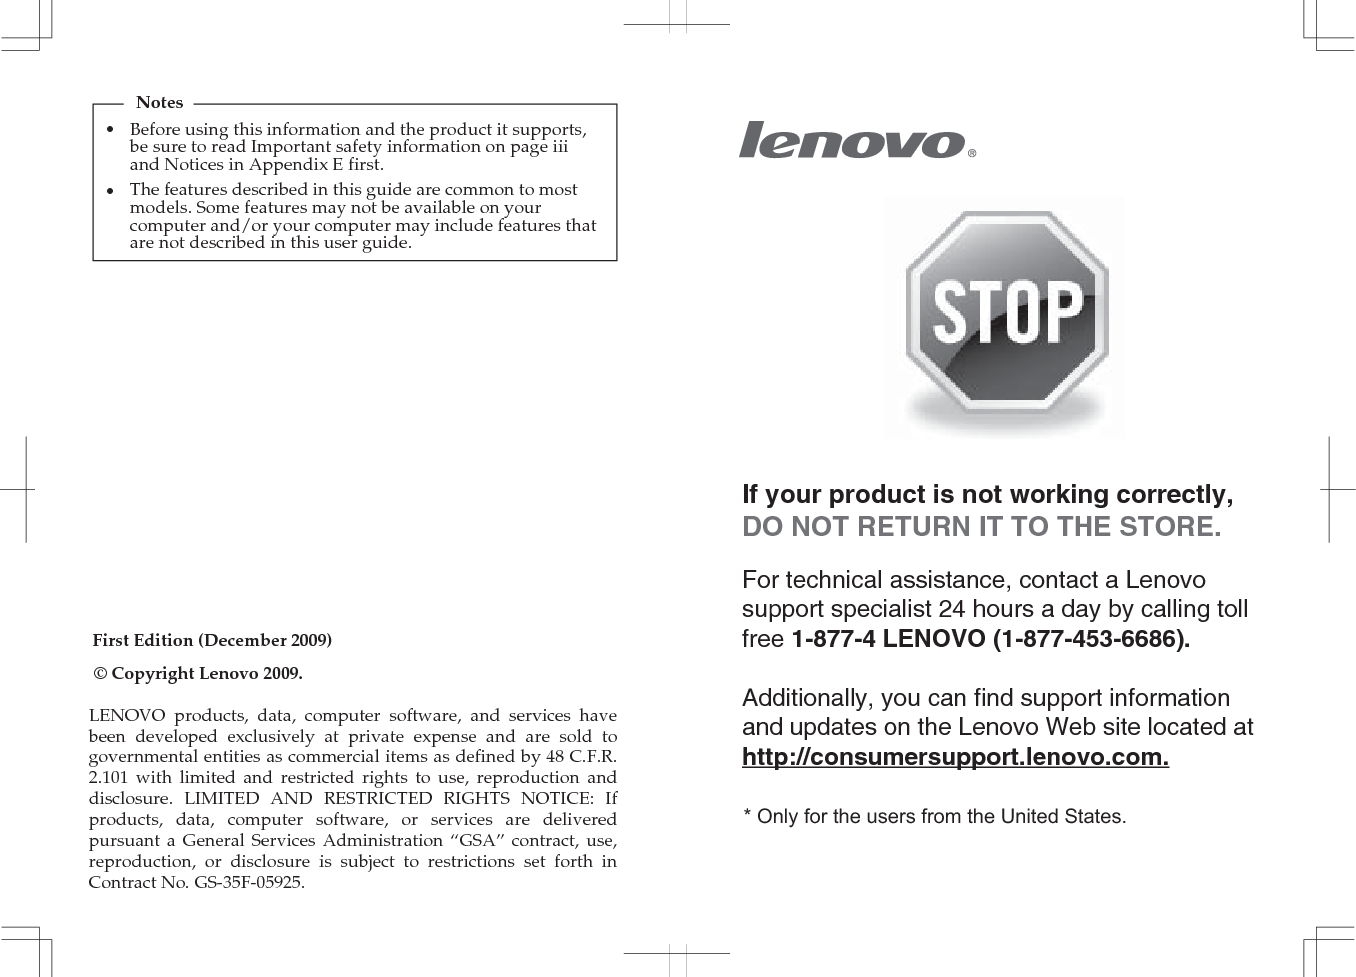 First Edition (December 2009)© Copyright Lenovo 2009. If your product is not working correctly, DO NOT RETURN IT TO THE STORE.For technical assistance, contact a Lenovo support specialist 24 hours a day by calling toll free 1-877-4 LENOVO (1-877-453-6686).   Additionally, you can find support information and updates on the Lenovo Web site located at http://consumersupport.lenovo.com.* Only for the users from the United States.•NotesBefore using this information and the product it supports, be sure to read Important safety information on page iii and Notices in Appendix E first.•The features described in this guide are common to most models. Some features may not be available on your computer and/or your computer may include features that are not described in this user guide.LENOVO products, data, computer software, and services have been developed exclusively at private expense and are sold to governmental entities as commercial items as defined by 48 C.F.R. 2.101 with limited and restricted rights to use, reproduction and disclosure. LIMITED AND RESTRICTED RIGHTS NOTICE: If products, data, computer software, or services are delivered pursuant a General Services Administration “GSA” contract, use, reproduction, or disclosure is subject to restrictions set forth in Contract No. GS-35F-05925.